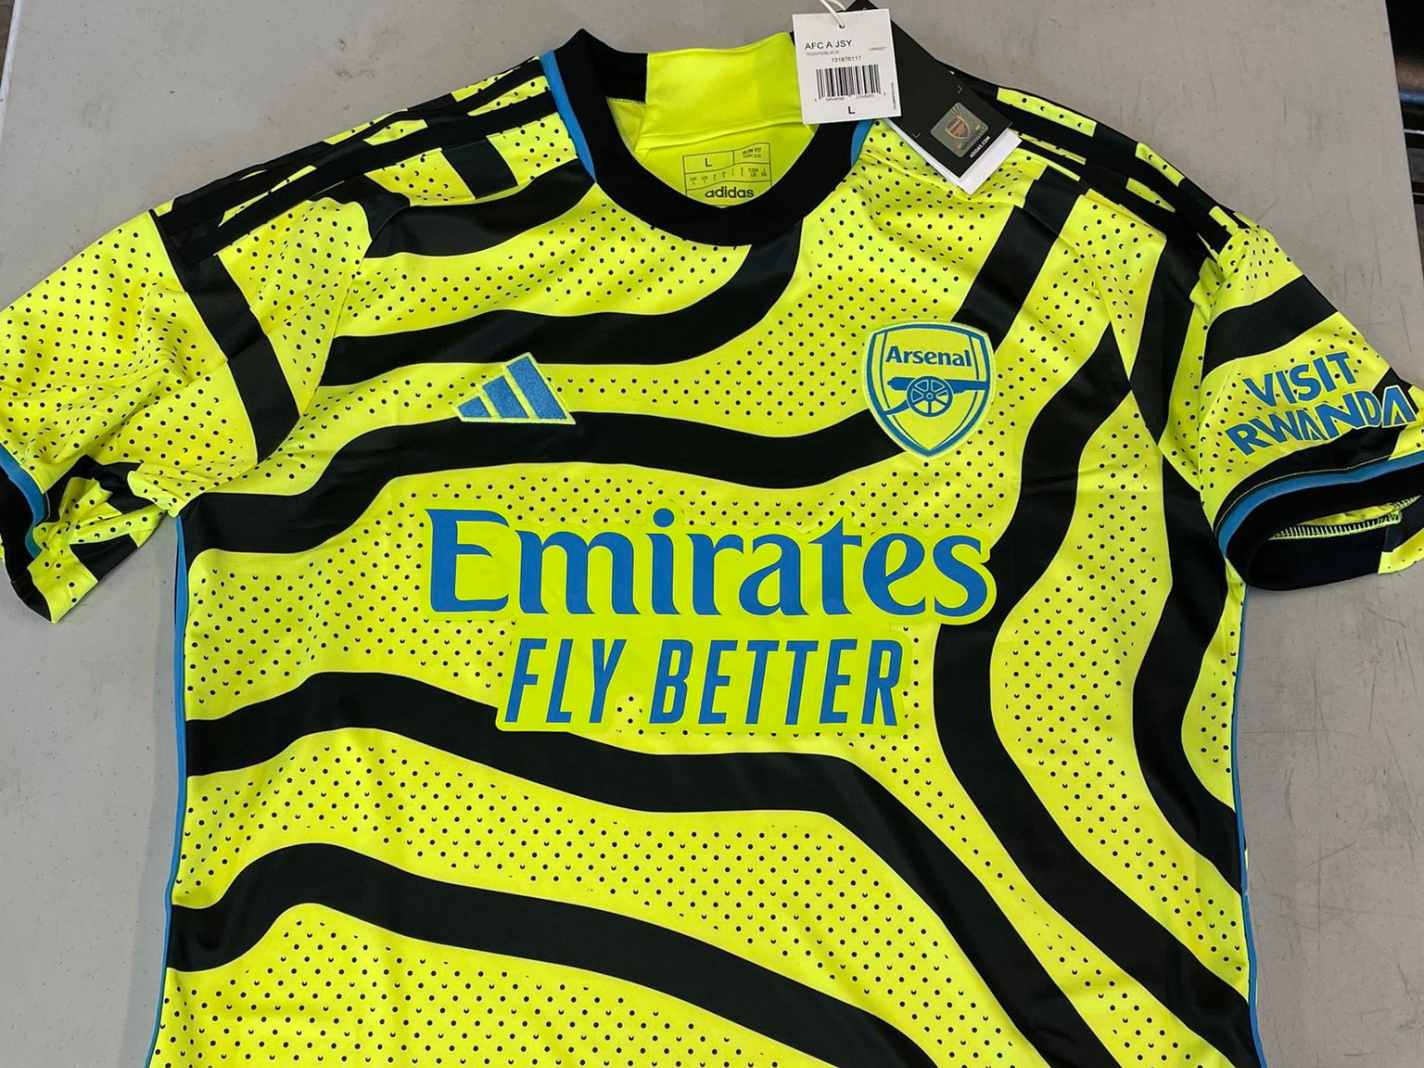 How? Upcoming Arsenal Away Kit Already Available in India